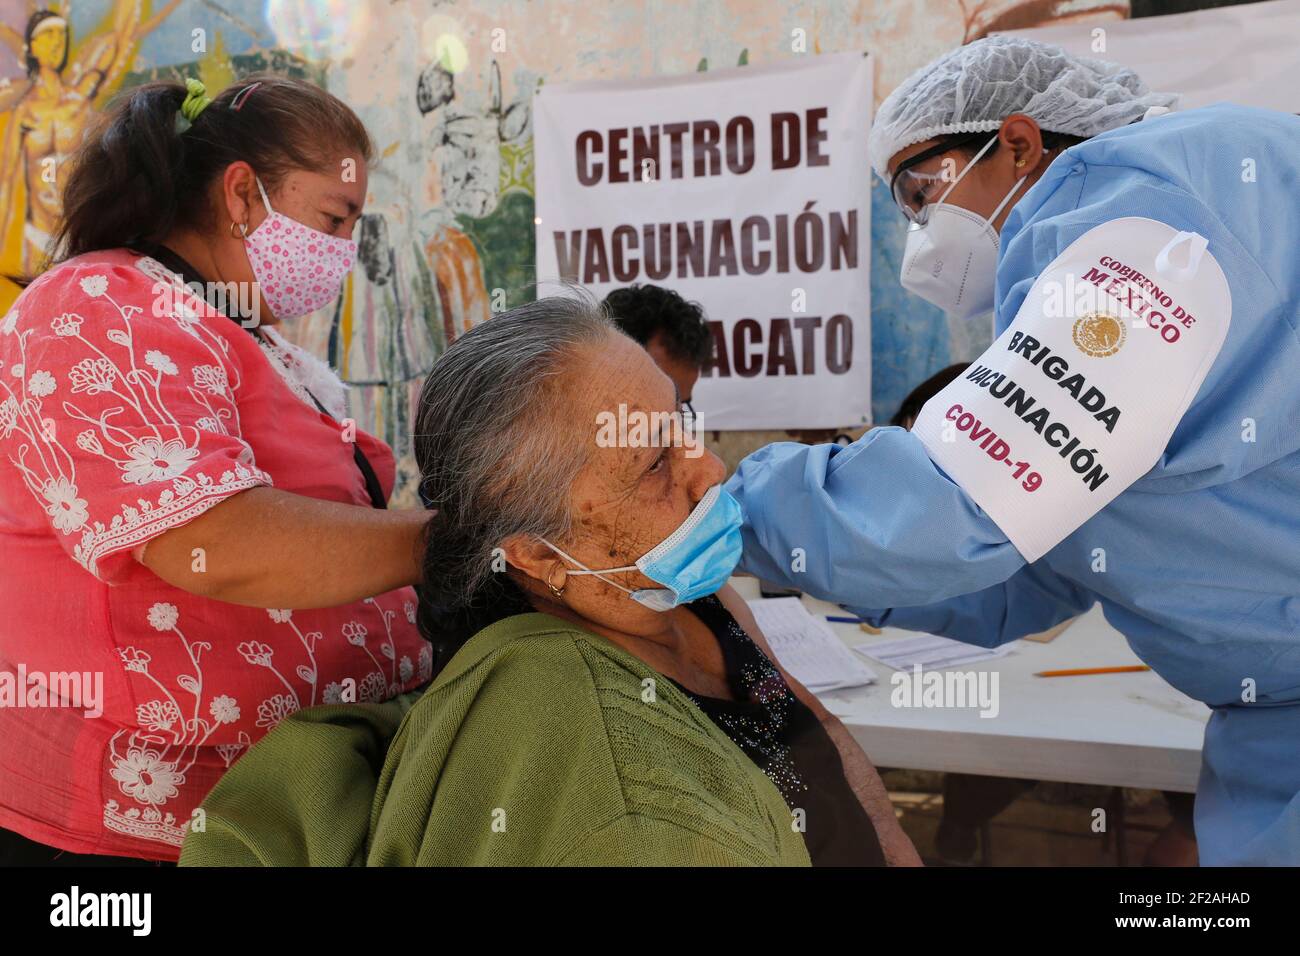 Uruapan, Mexico. 09th Mar, 2021. A person receives a dose of Pfizer-BioNTech Covid-19 vaccine, during mass vaccine inside of Hermanos Lopez Rayon sports center, a designated priority vaccination center for elderly over 60 years in the Uruapan town. On March 10, 2021 in Michoacan, Mexico (Photo by Eyepix/Sipa USA) Credit: Sipa USA/Alamy Live News Stock Photo